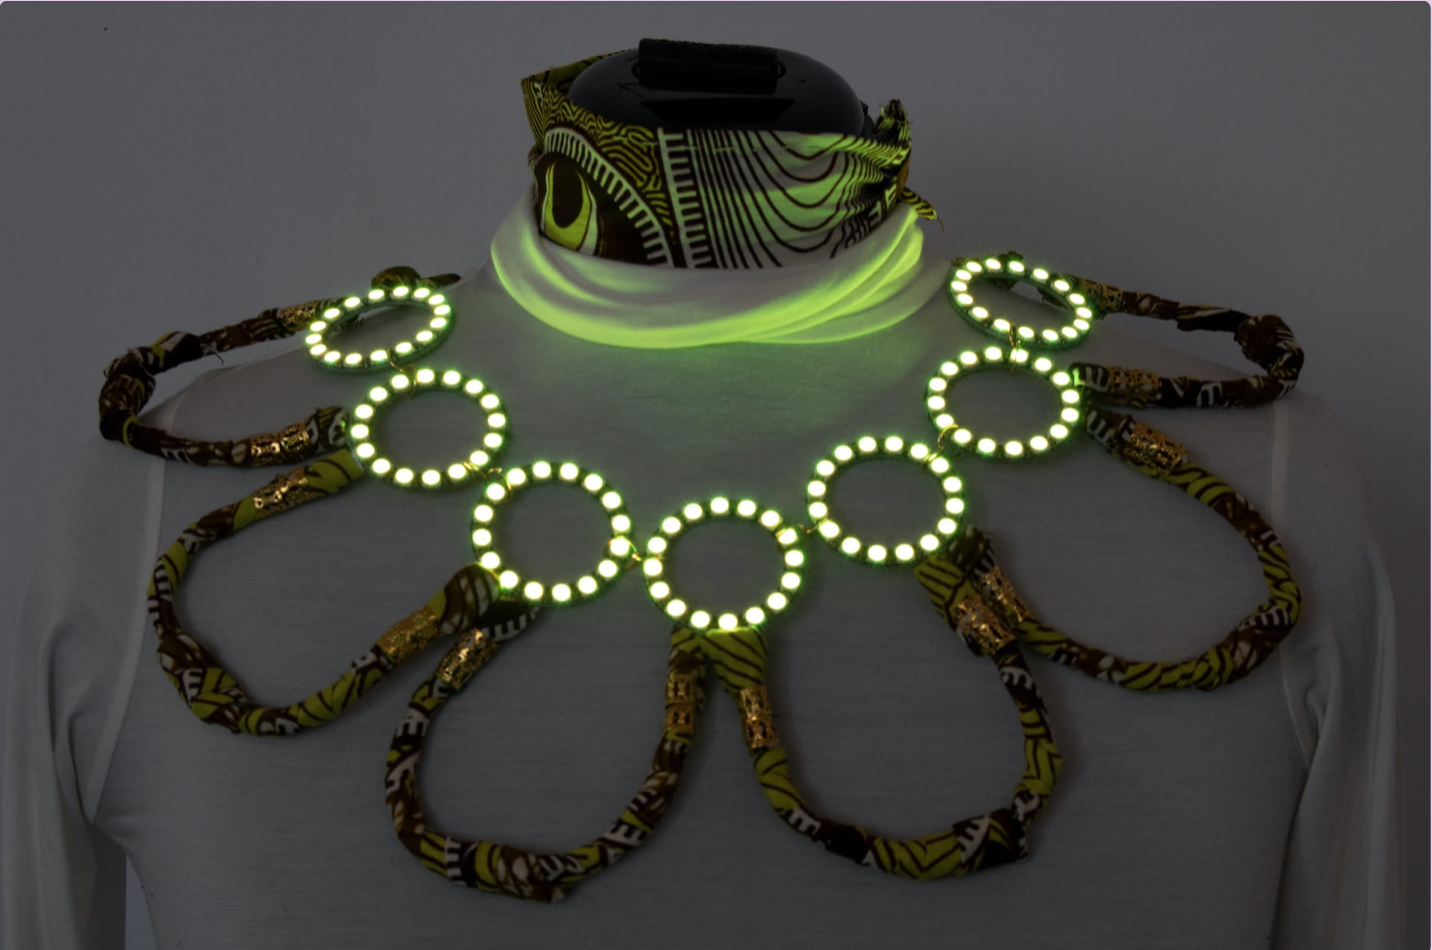 Large necklace with neon lights.